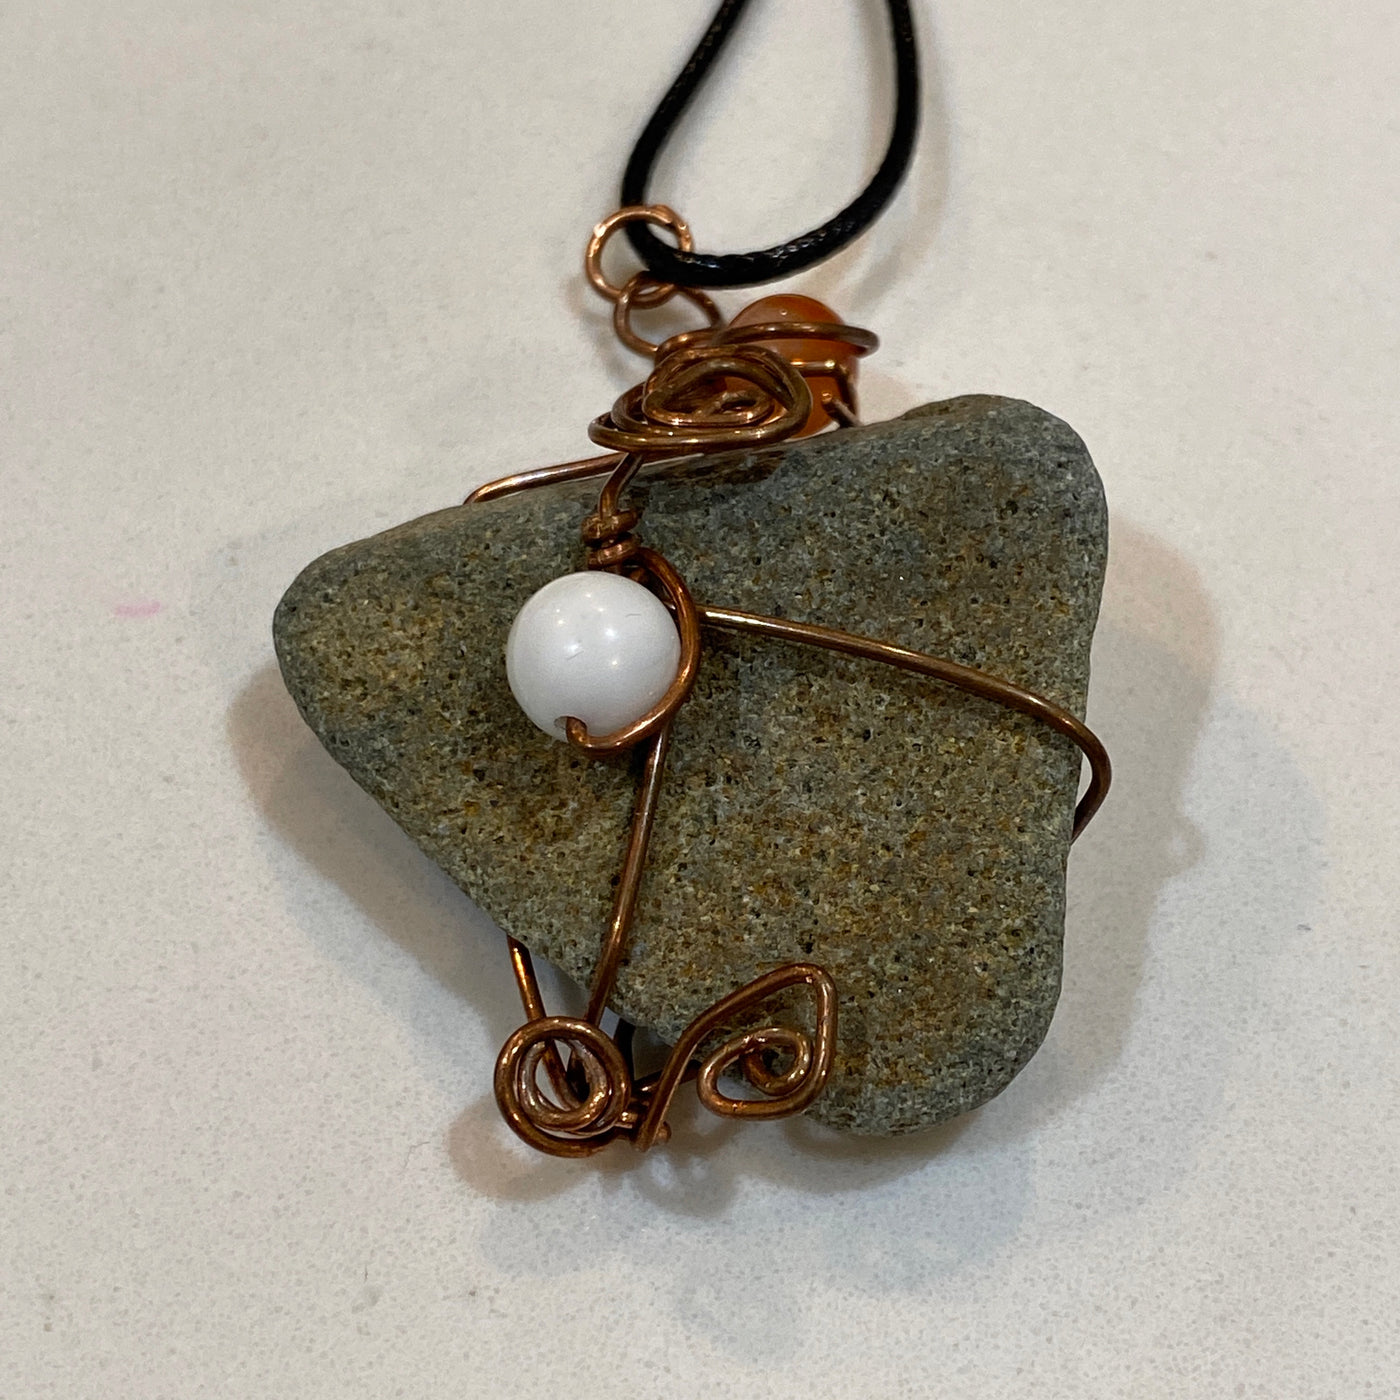 Grey stone, white natural stones and wire. Big pendant.